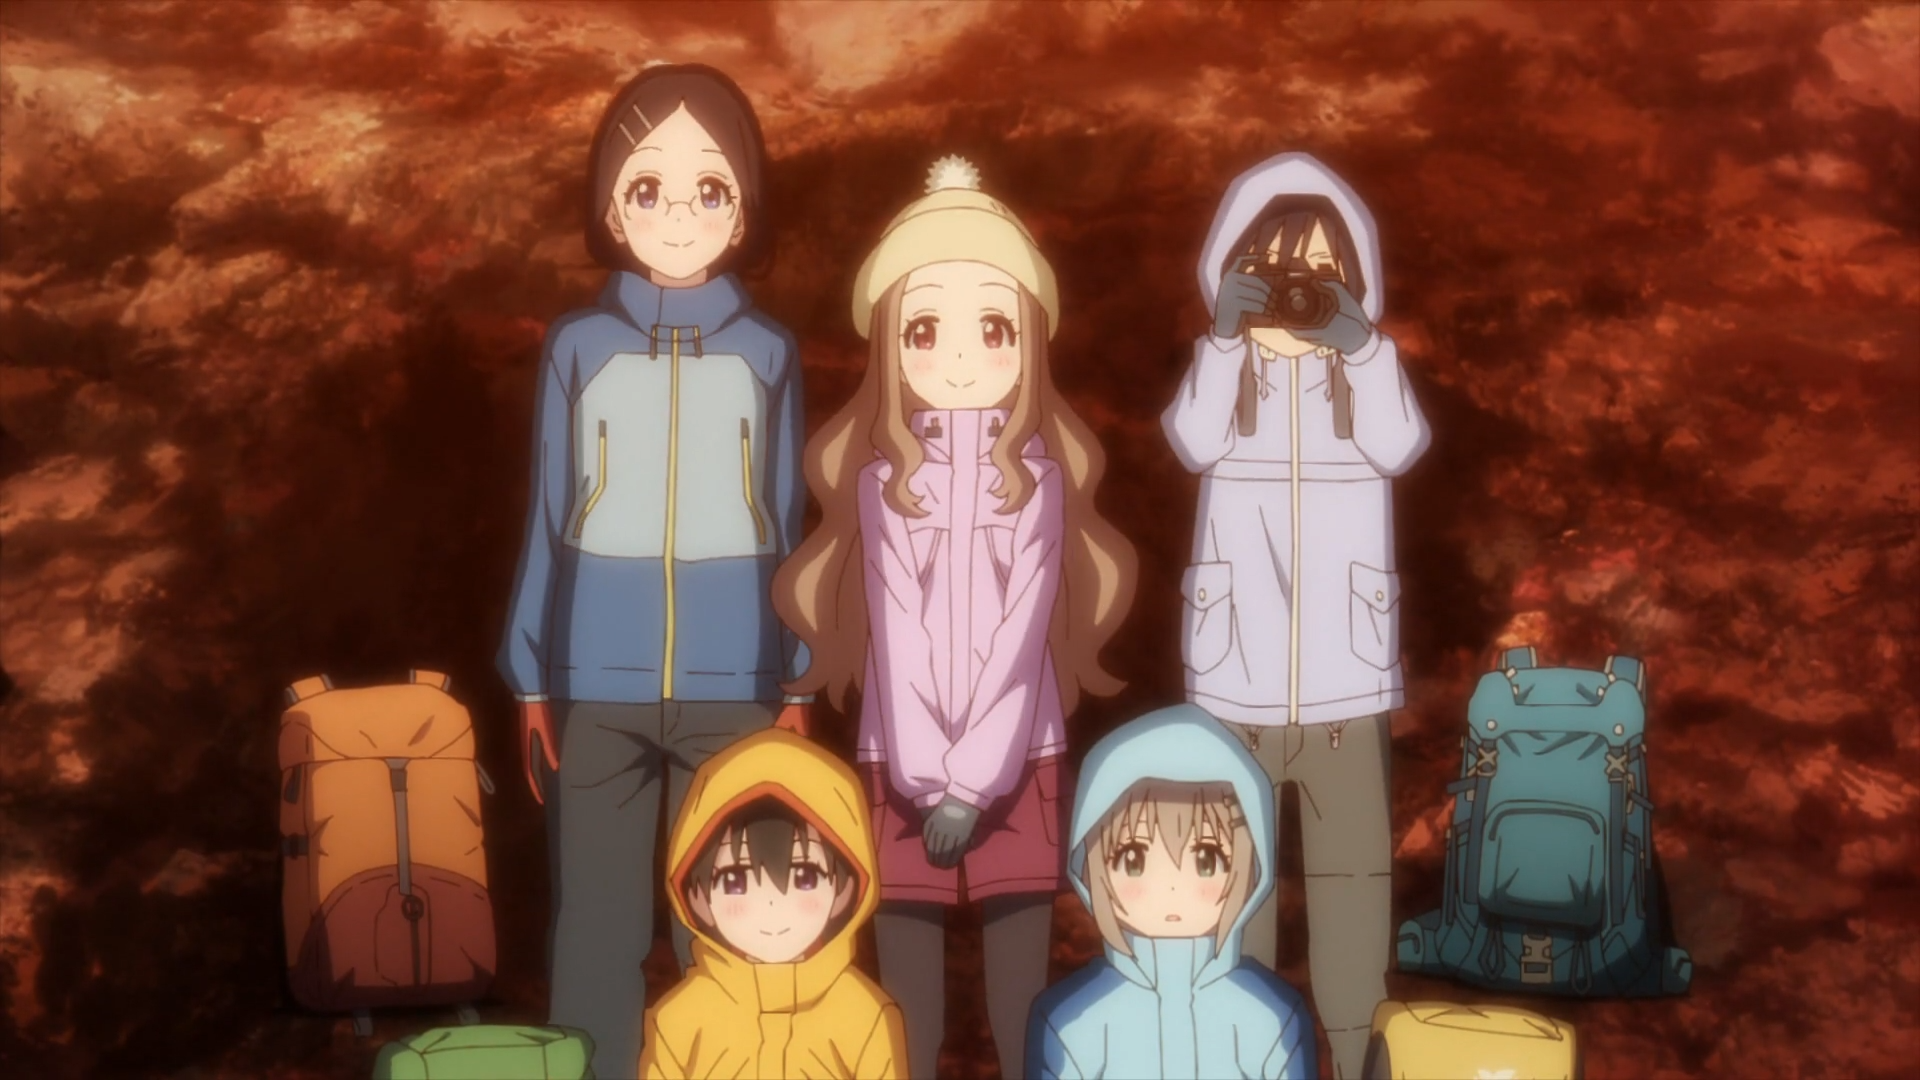 Yama no Susume is Back! Should You Watch It?